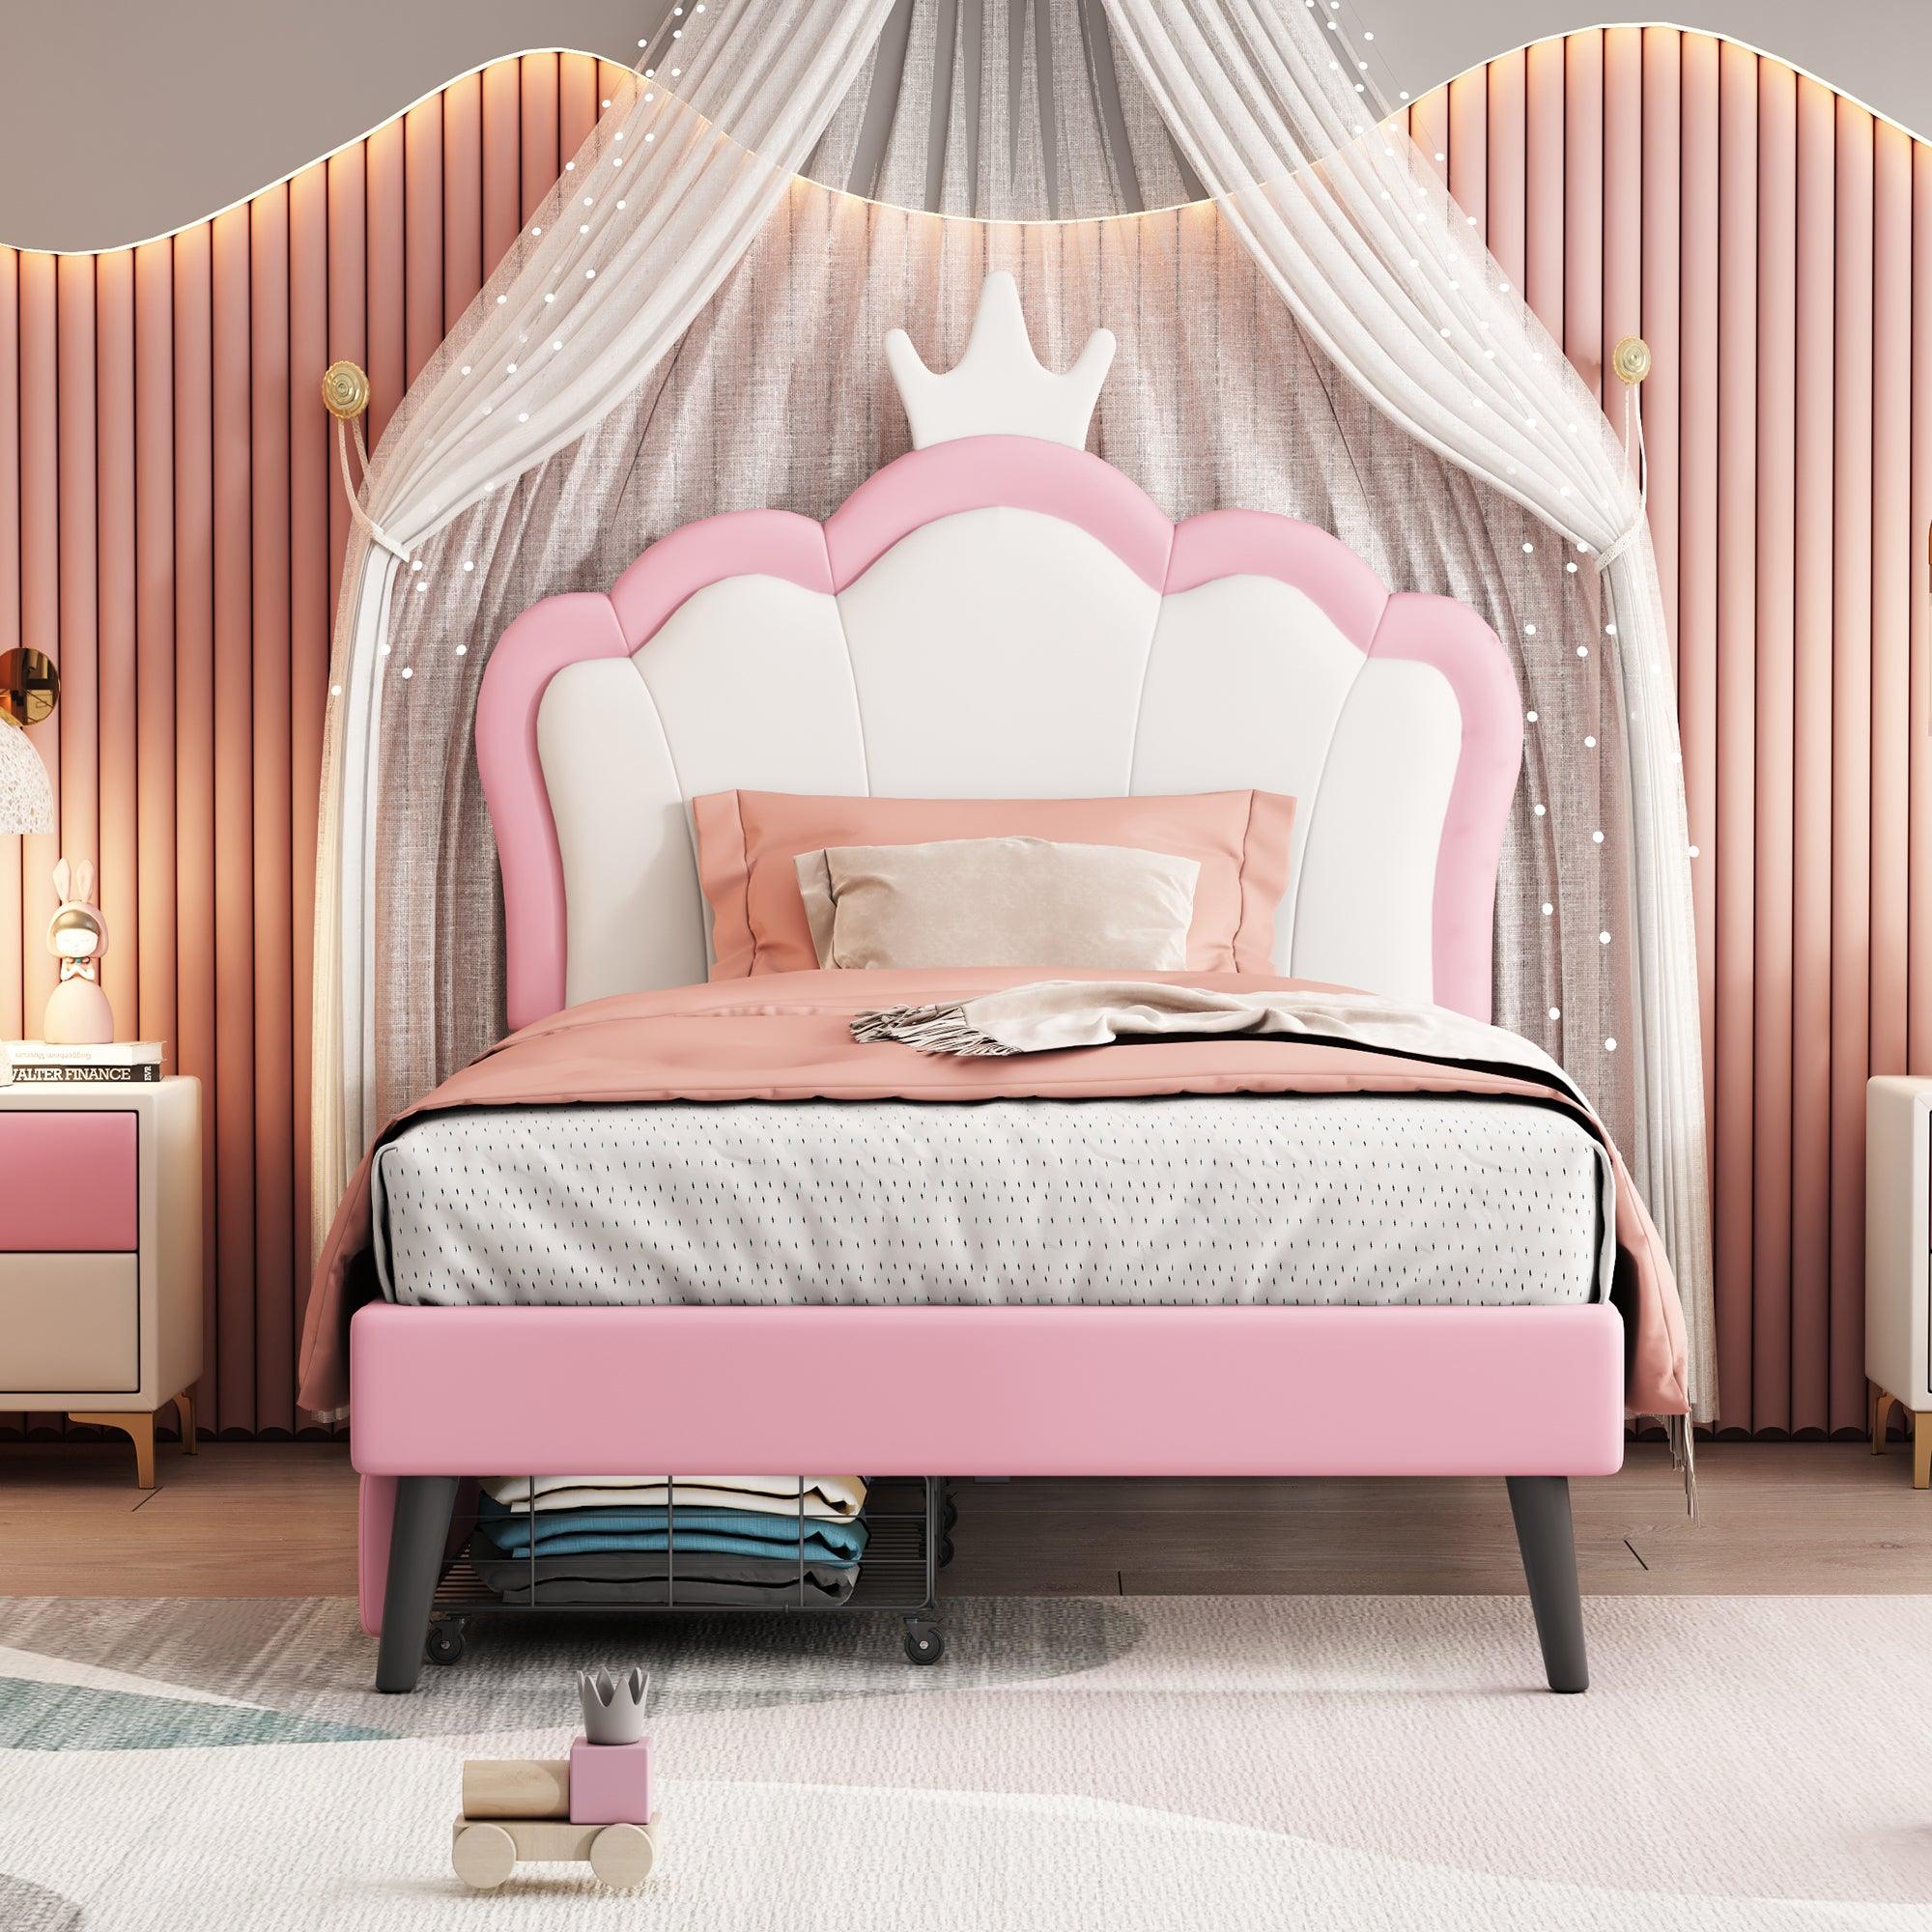 🆓🚛 Twin Size Upholstered Princess Bed With Crown Headboard & 2 Drawers, Twin Size Platform Bed With Headboard & Footboard, White & Pink